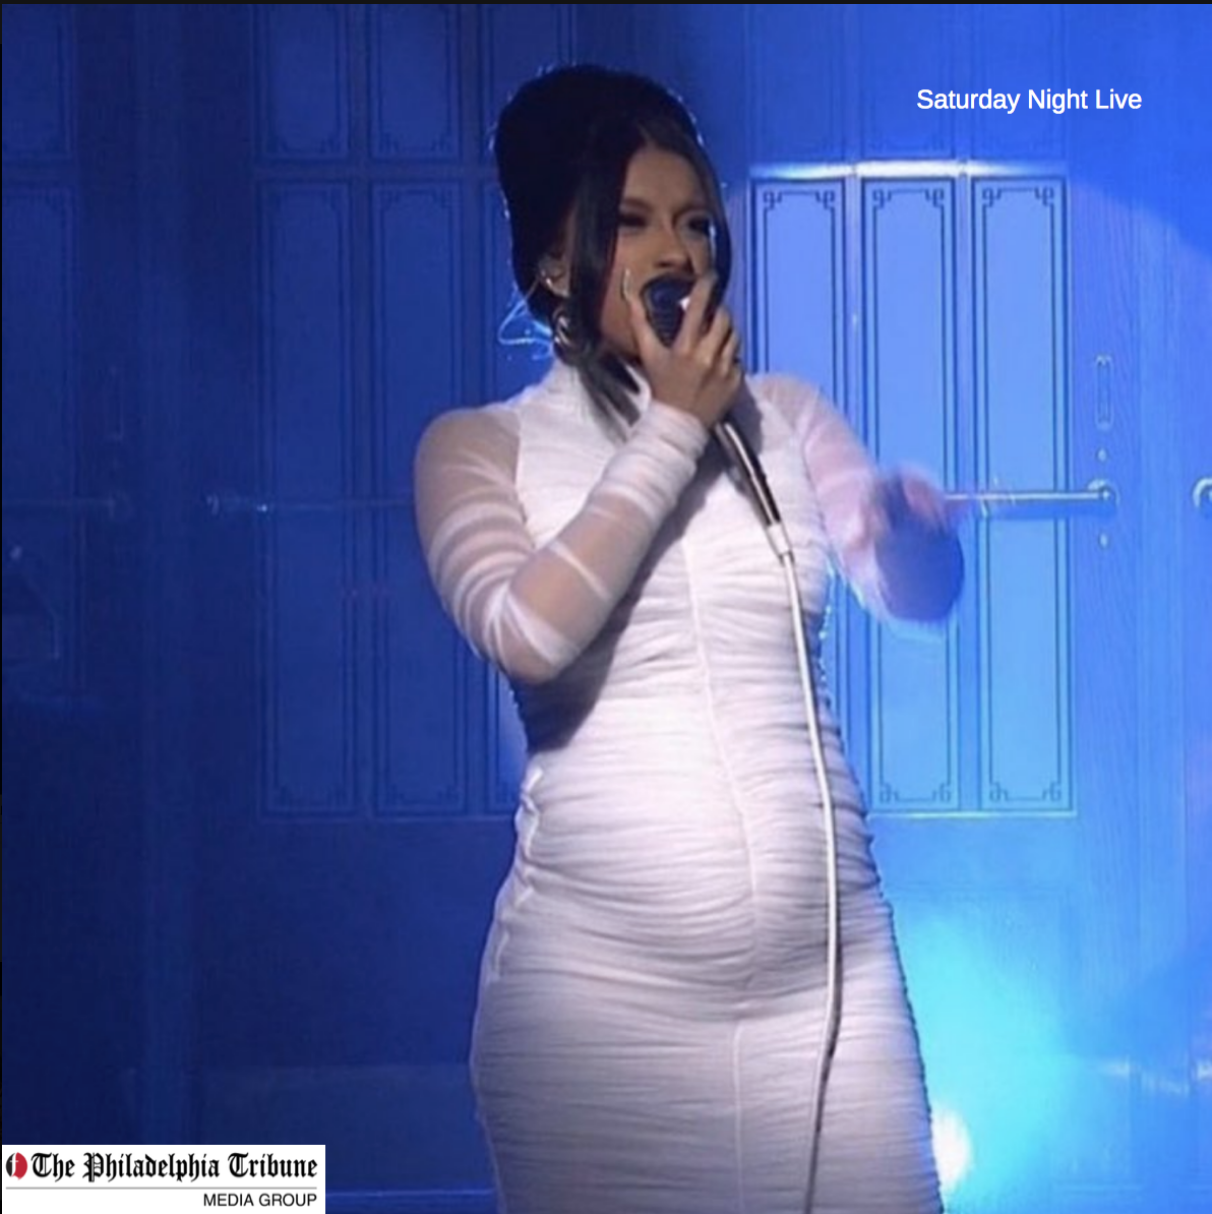 04/08/18 : Cardi B unveils baby bump on SNL while celebrating her breakthrough year